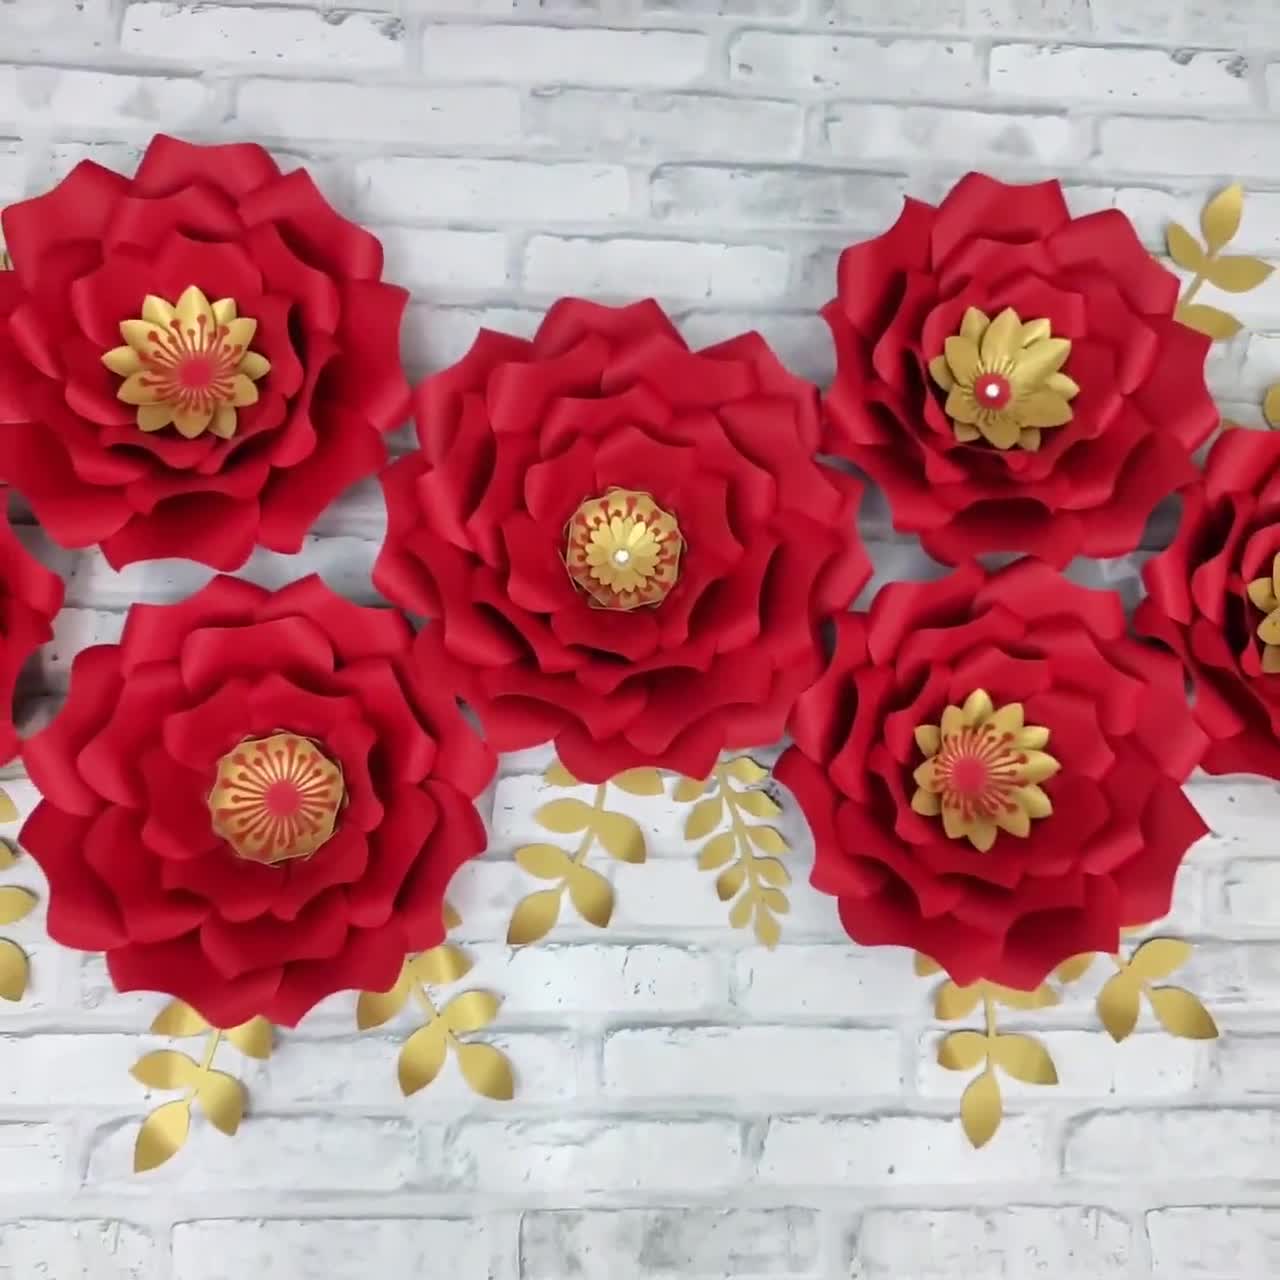 BalsaCircle 6 Pieces 12 16 20 Red Carnations Large Tissue Paper Flowers  Wall Backdrop 